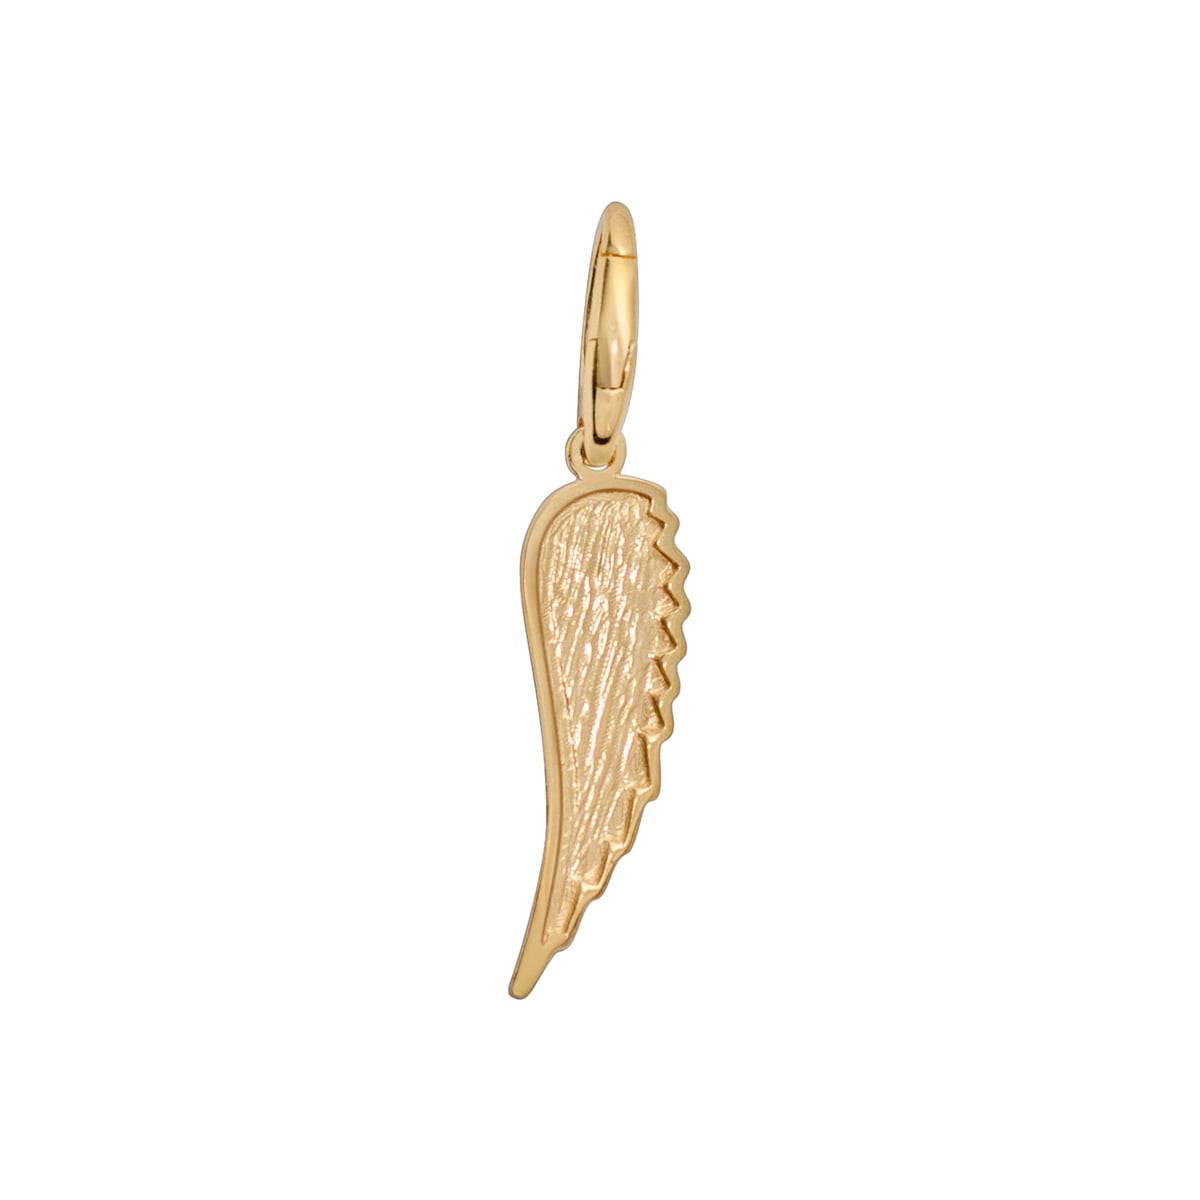 Gold filled charms angel wing pendant , 5 15 50 150 pieces 30% discount ,  gold angel wings charms , Gold fill Bird Wing Pendant , Angel Jewelry charms  , Bird Wing 